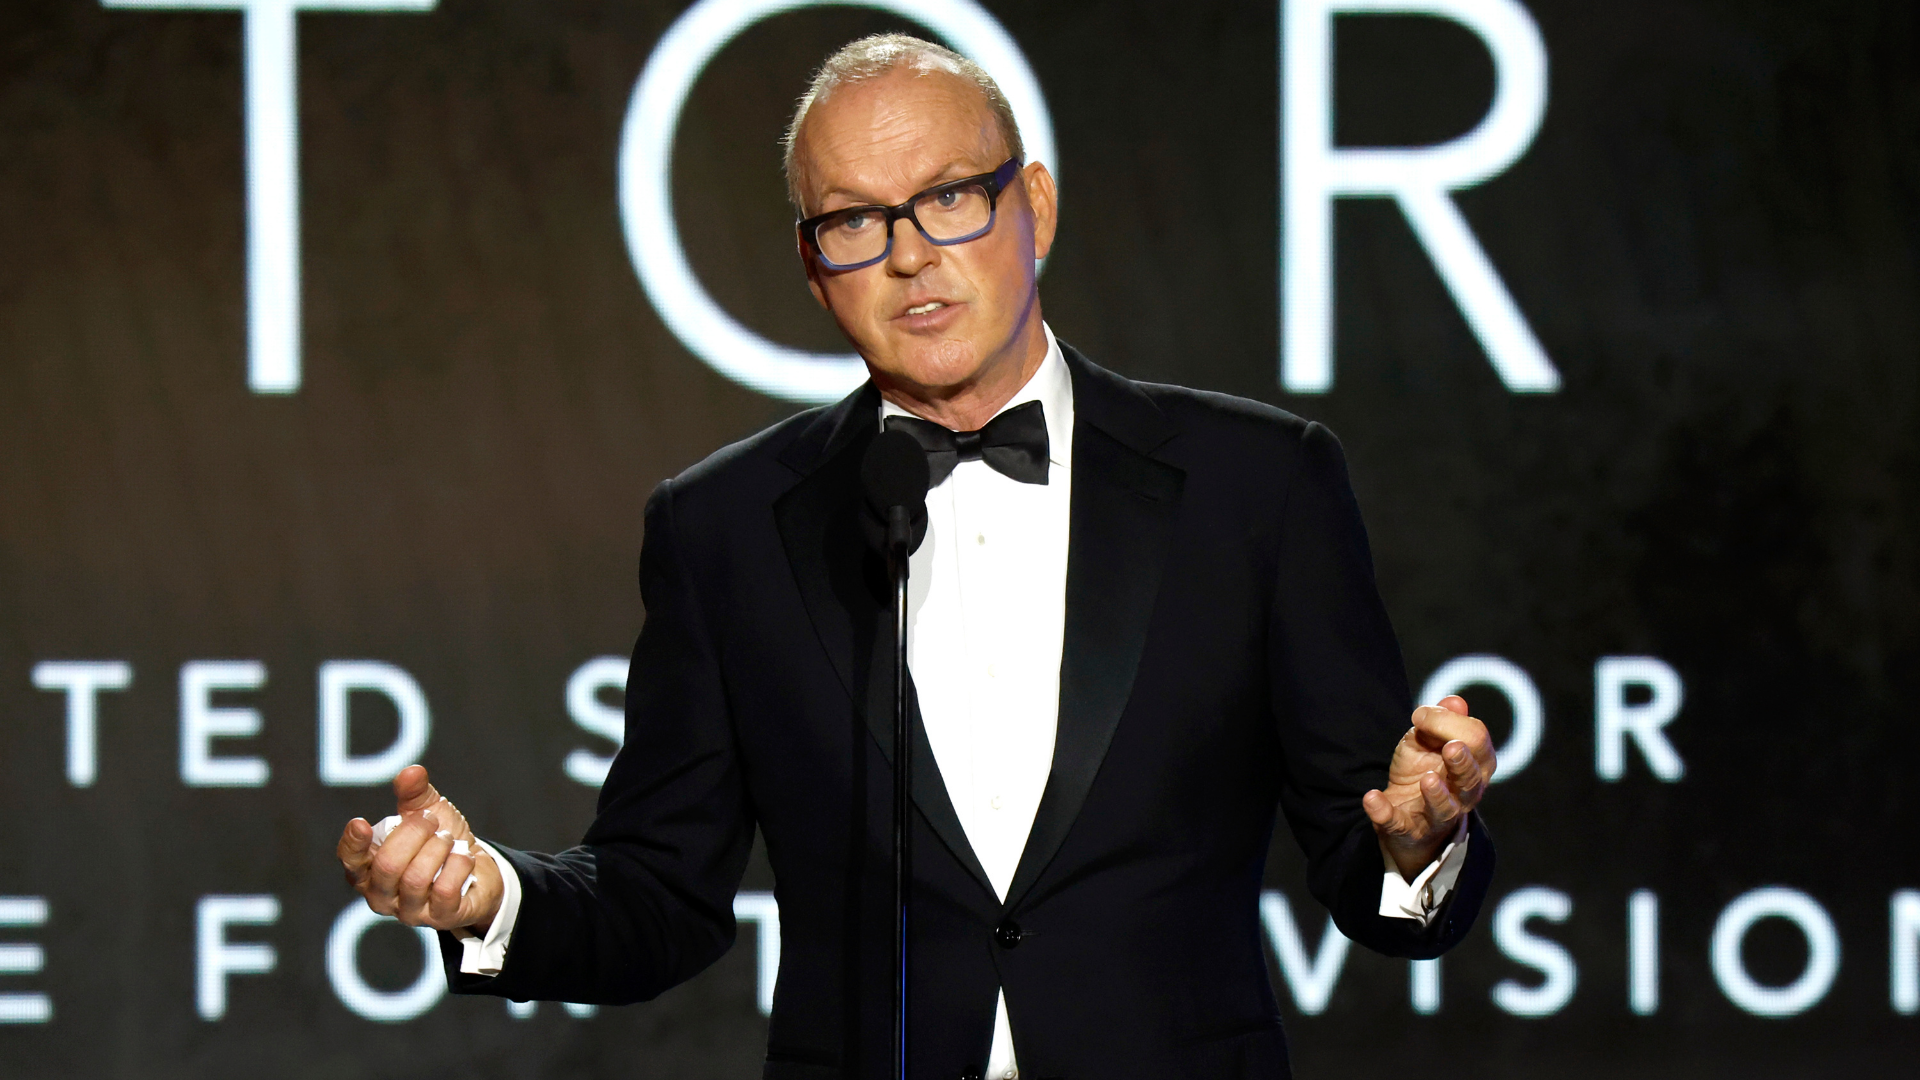 Michael Keaton lends his support